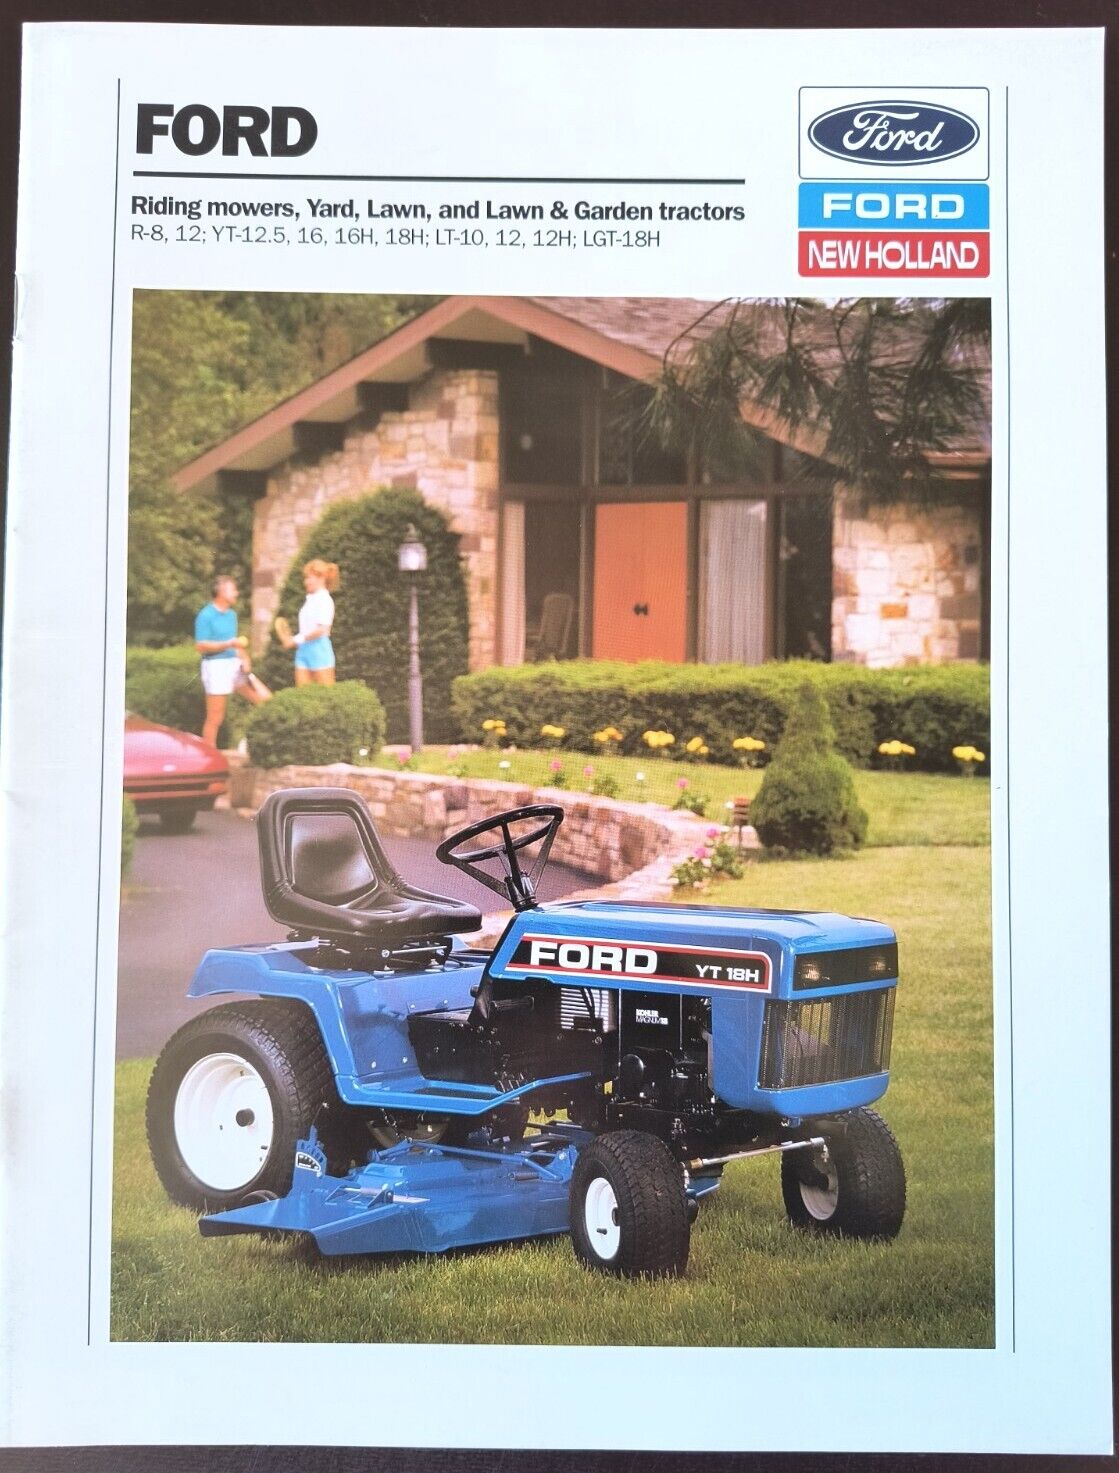 1990s Ford New Holland Lawn Tractors Sales Brochure  Advertising Catalog Mower